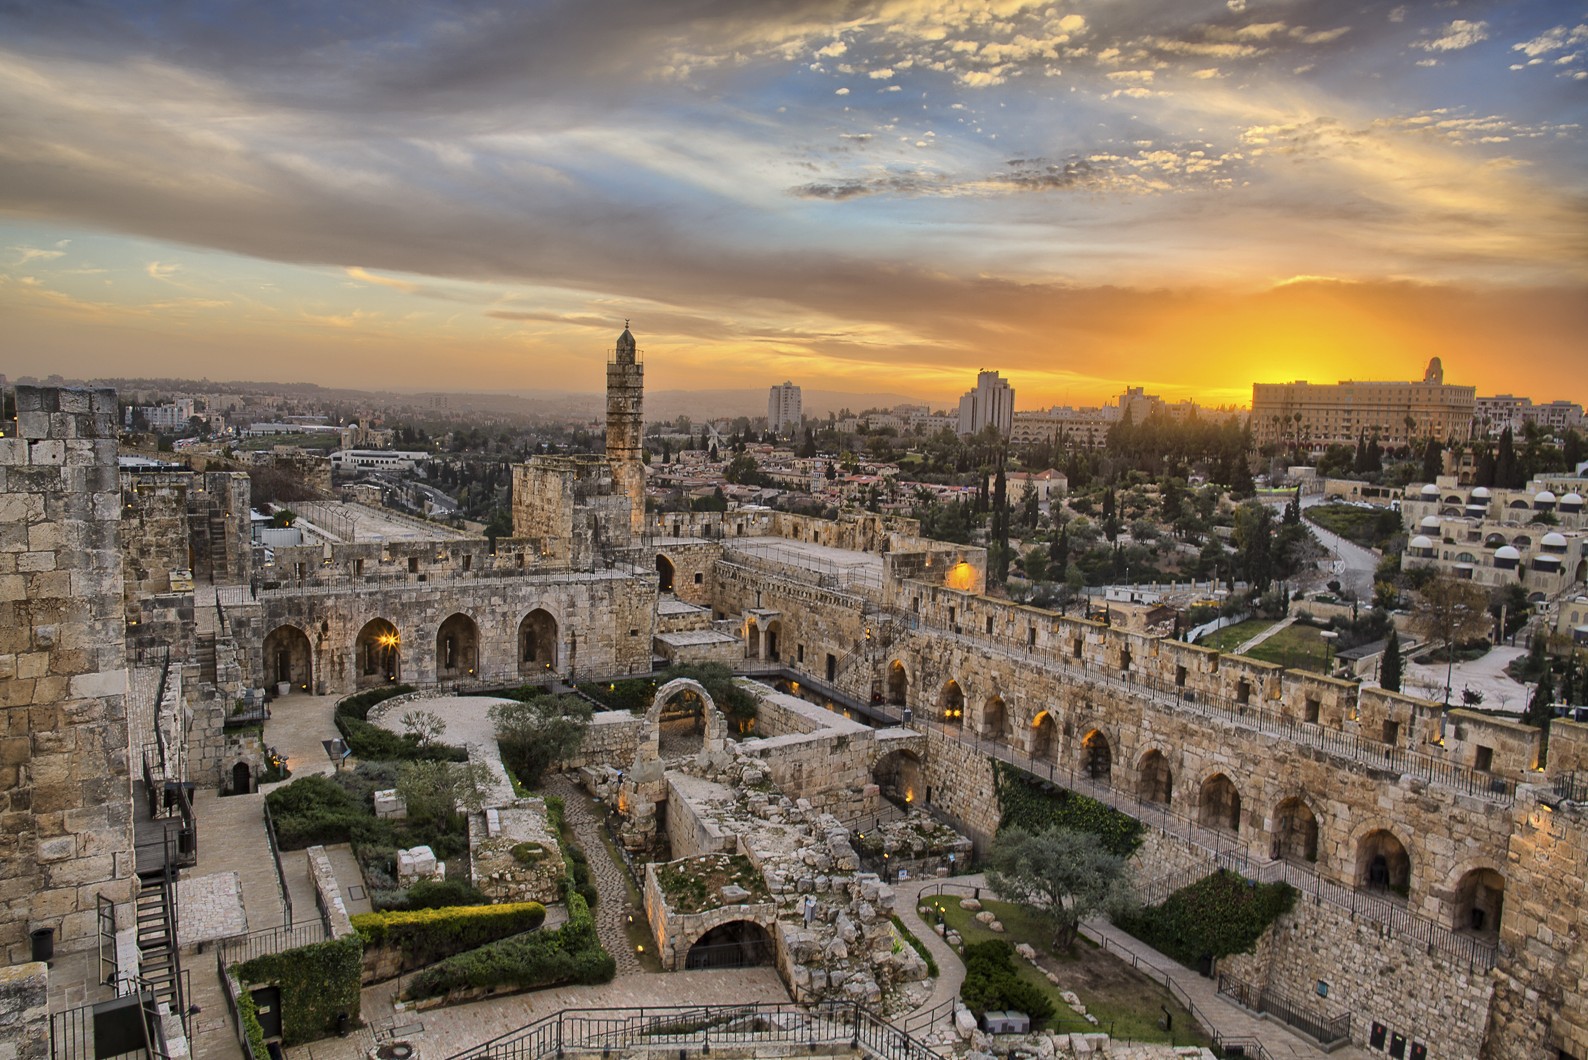 Yerushalayim 5778: A Vision for Our Time